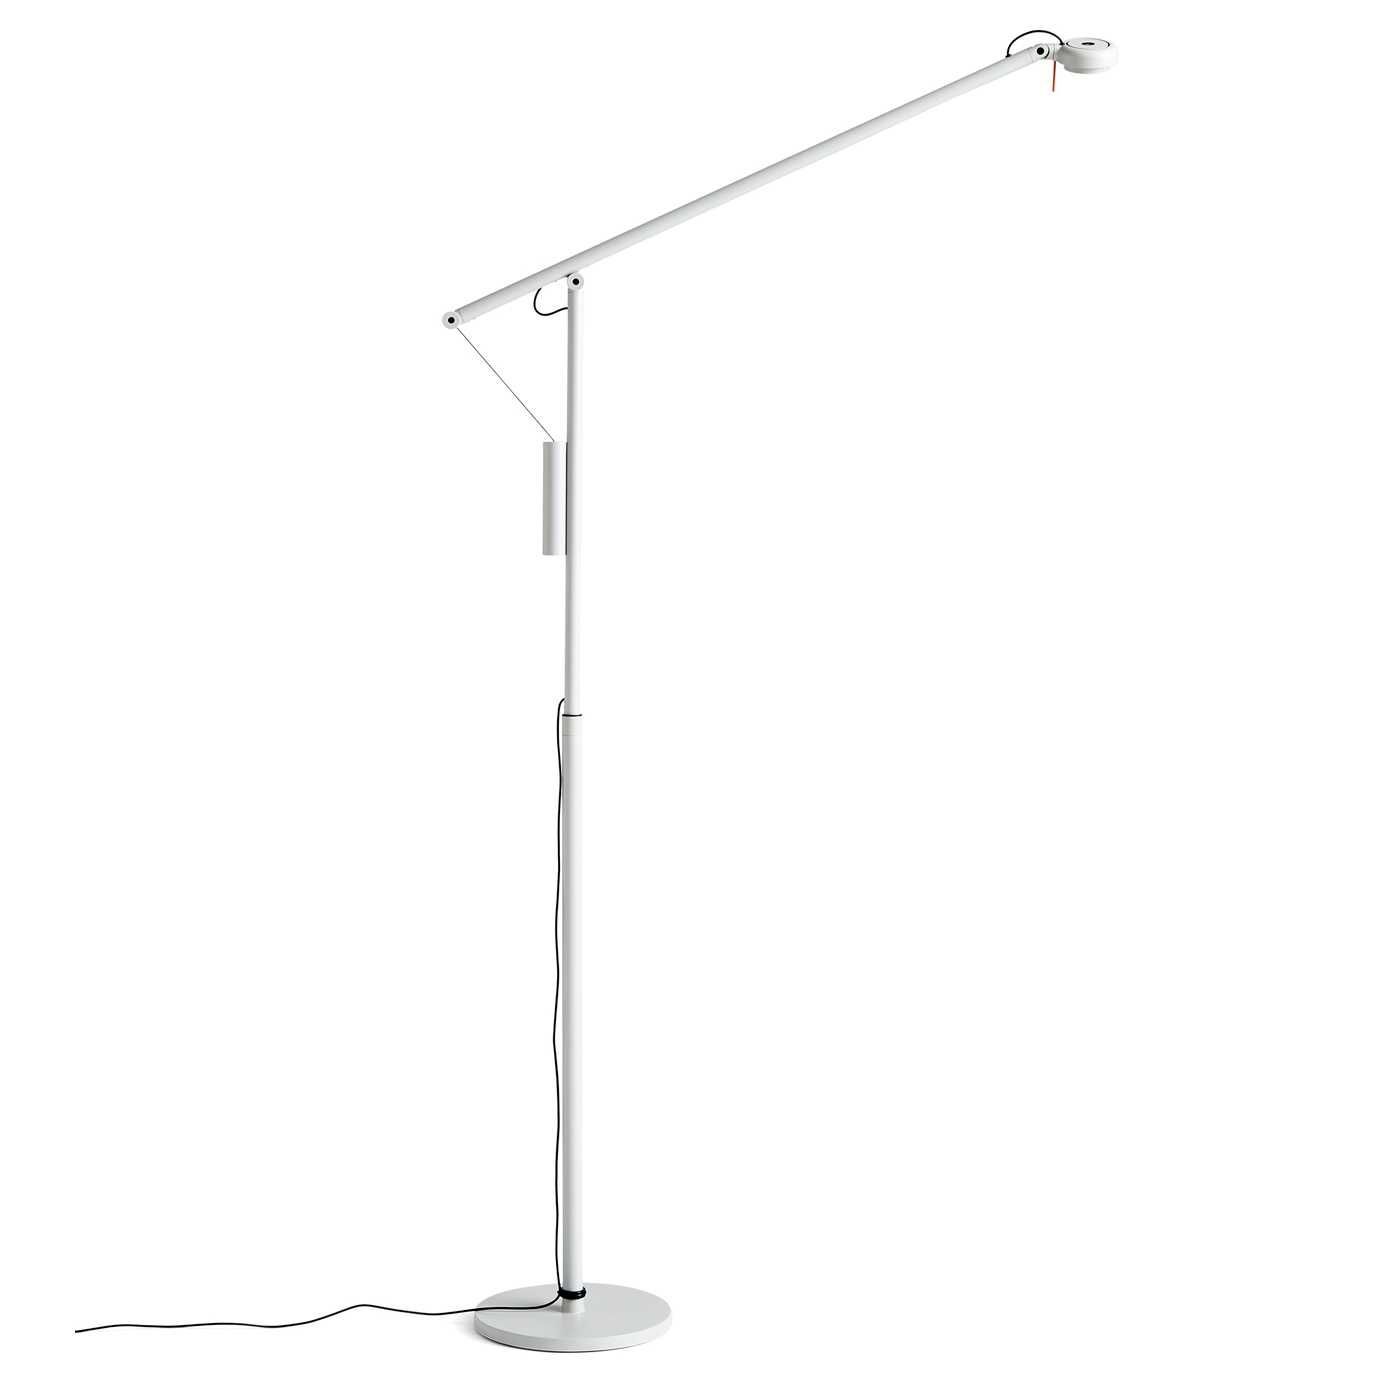 Hay Fifty-Fifty vloerlamp LED ash grey